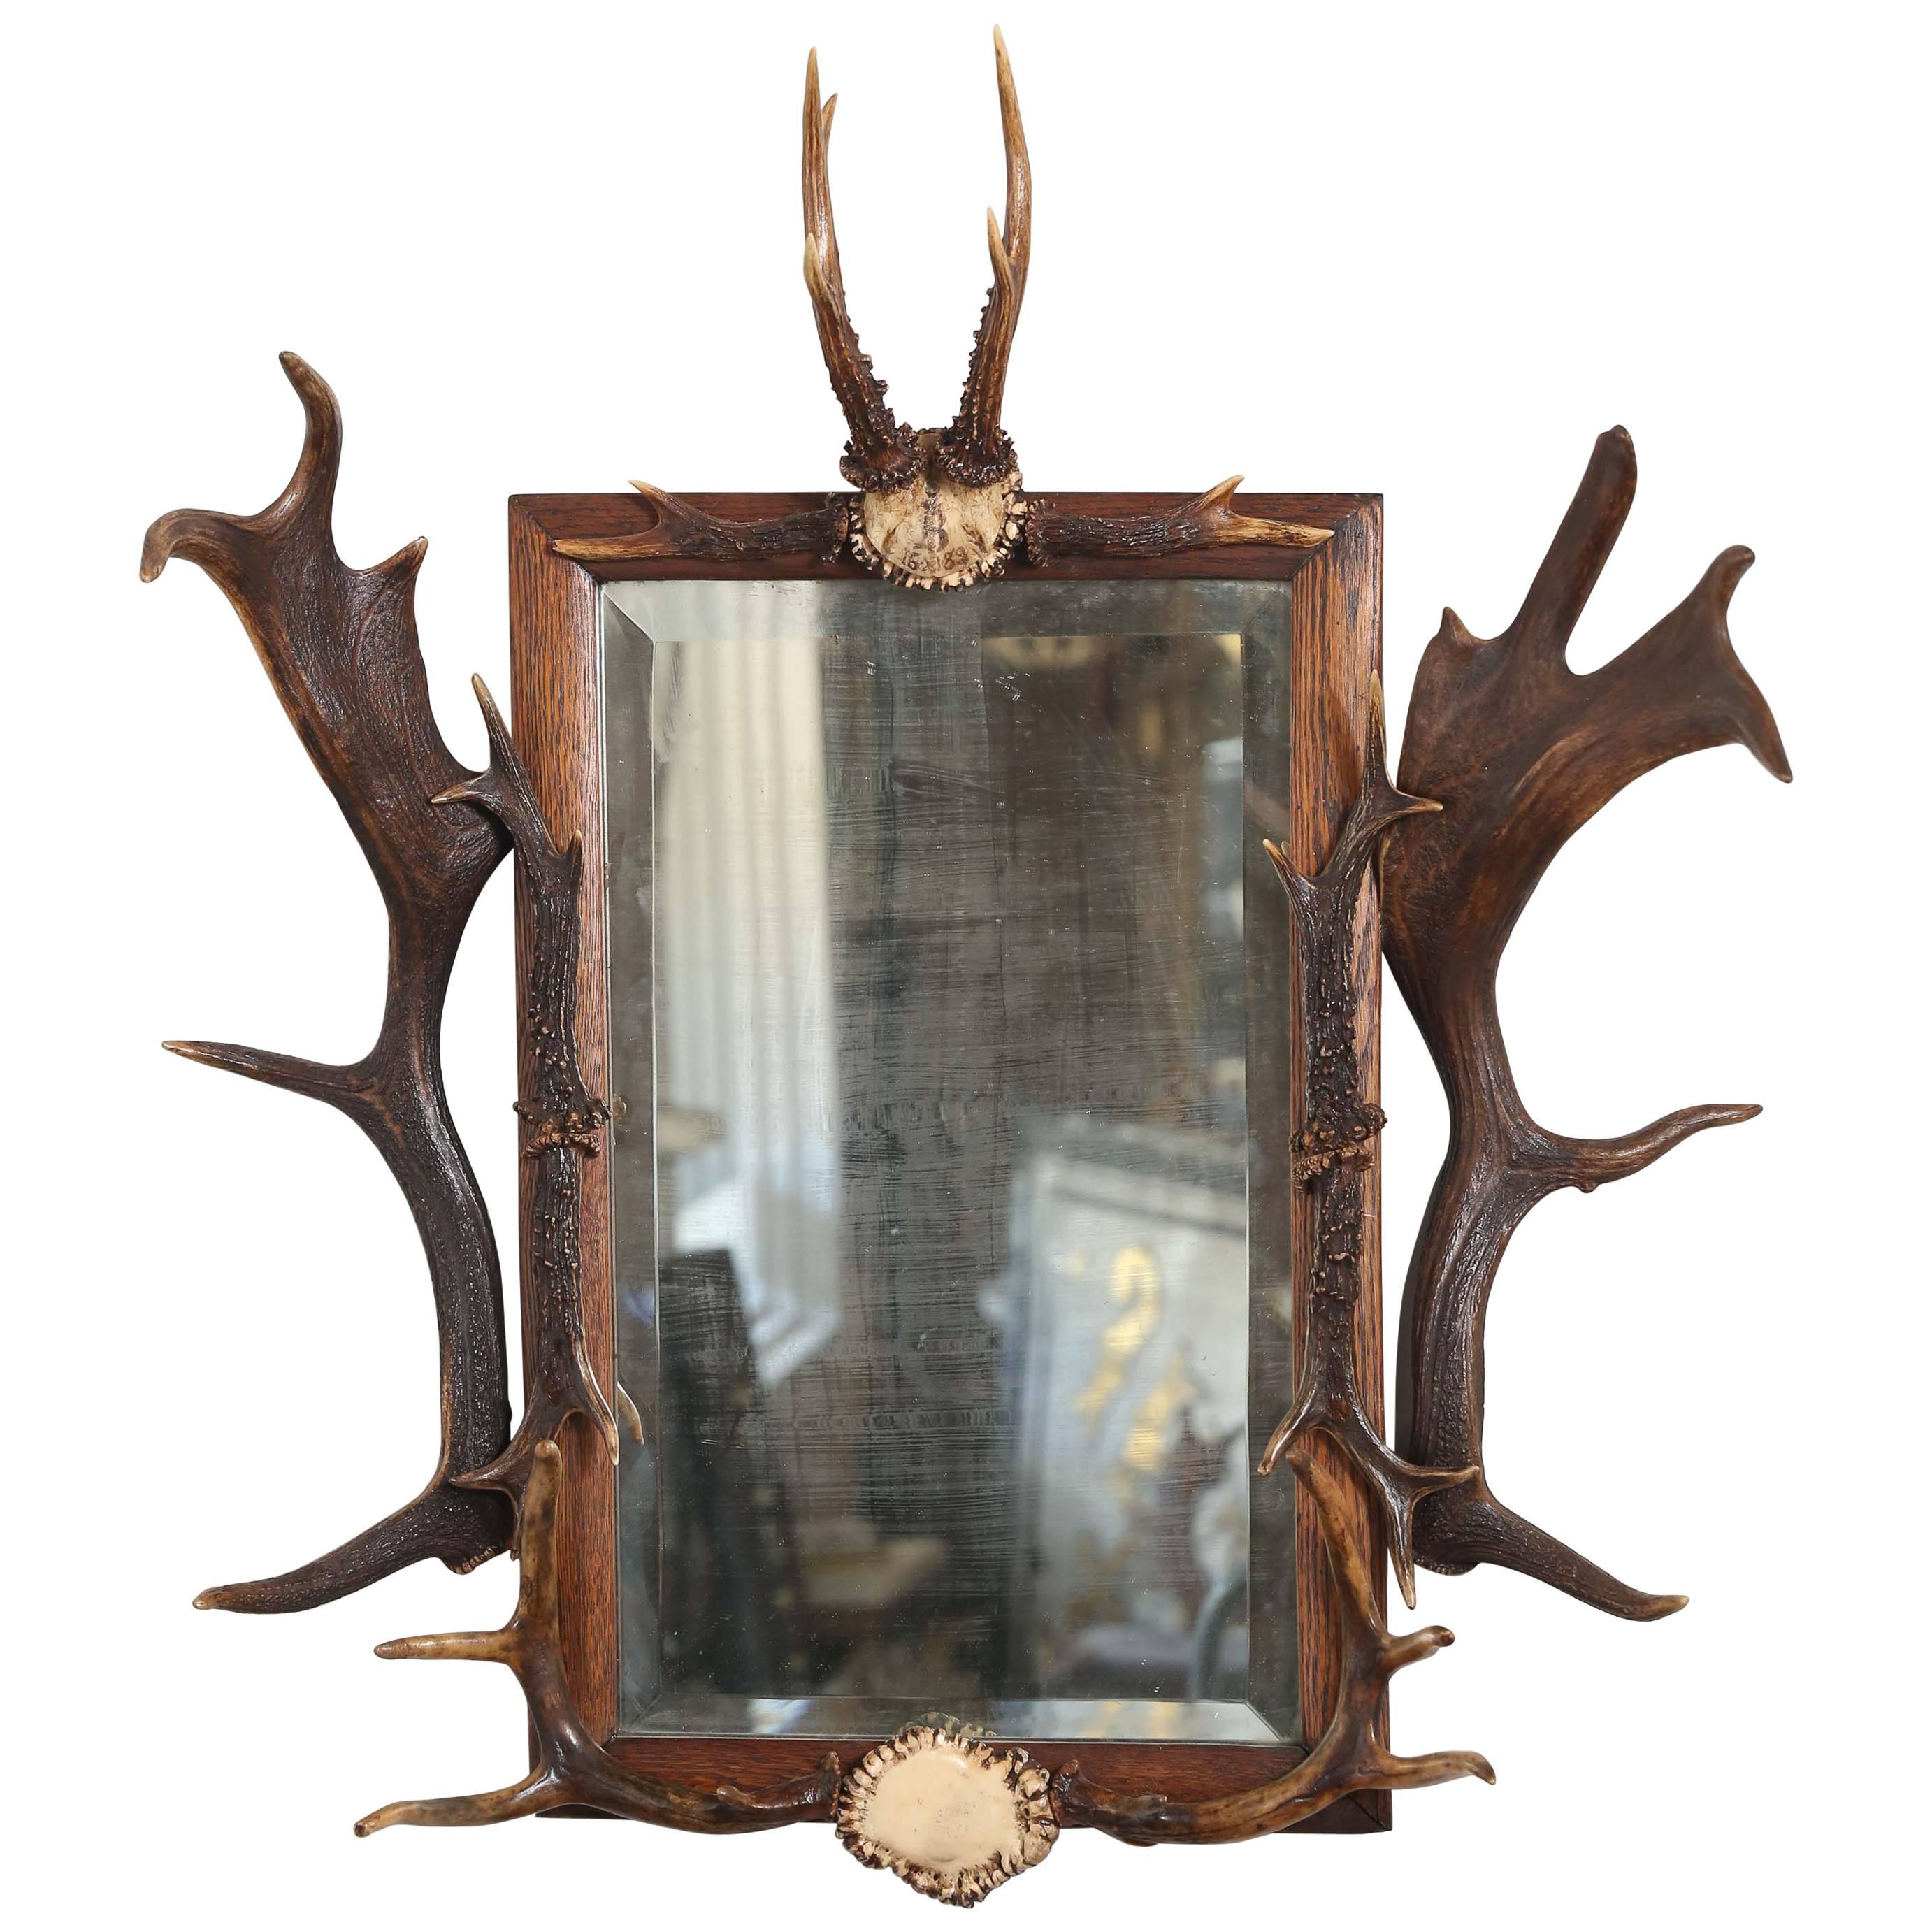 Antique Black Forest Hunt Mirror from Bodendorf Castle, Germany